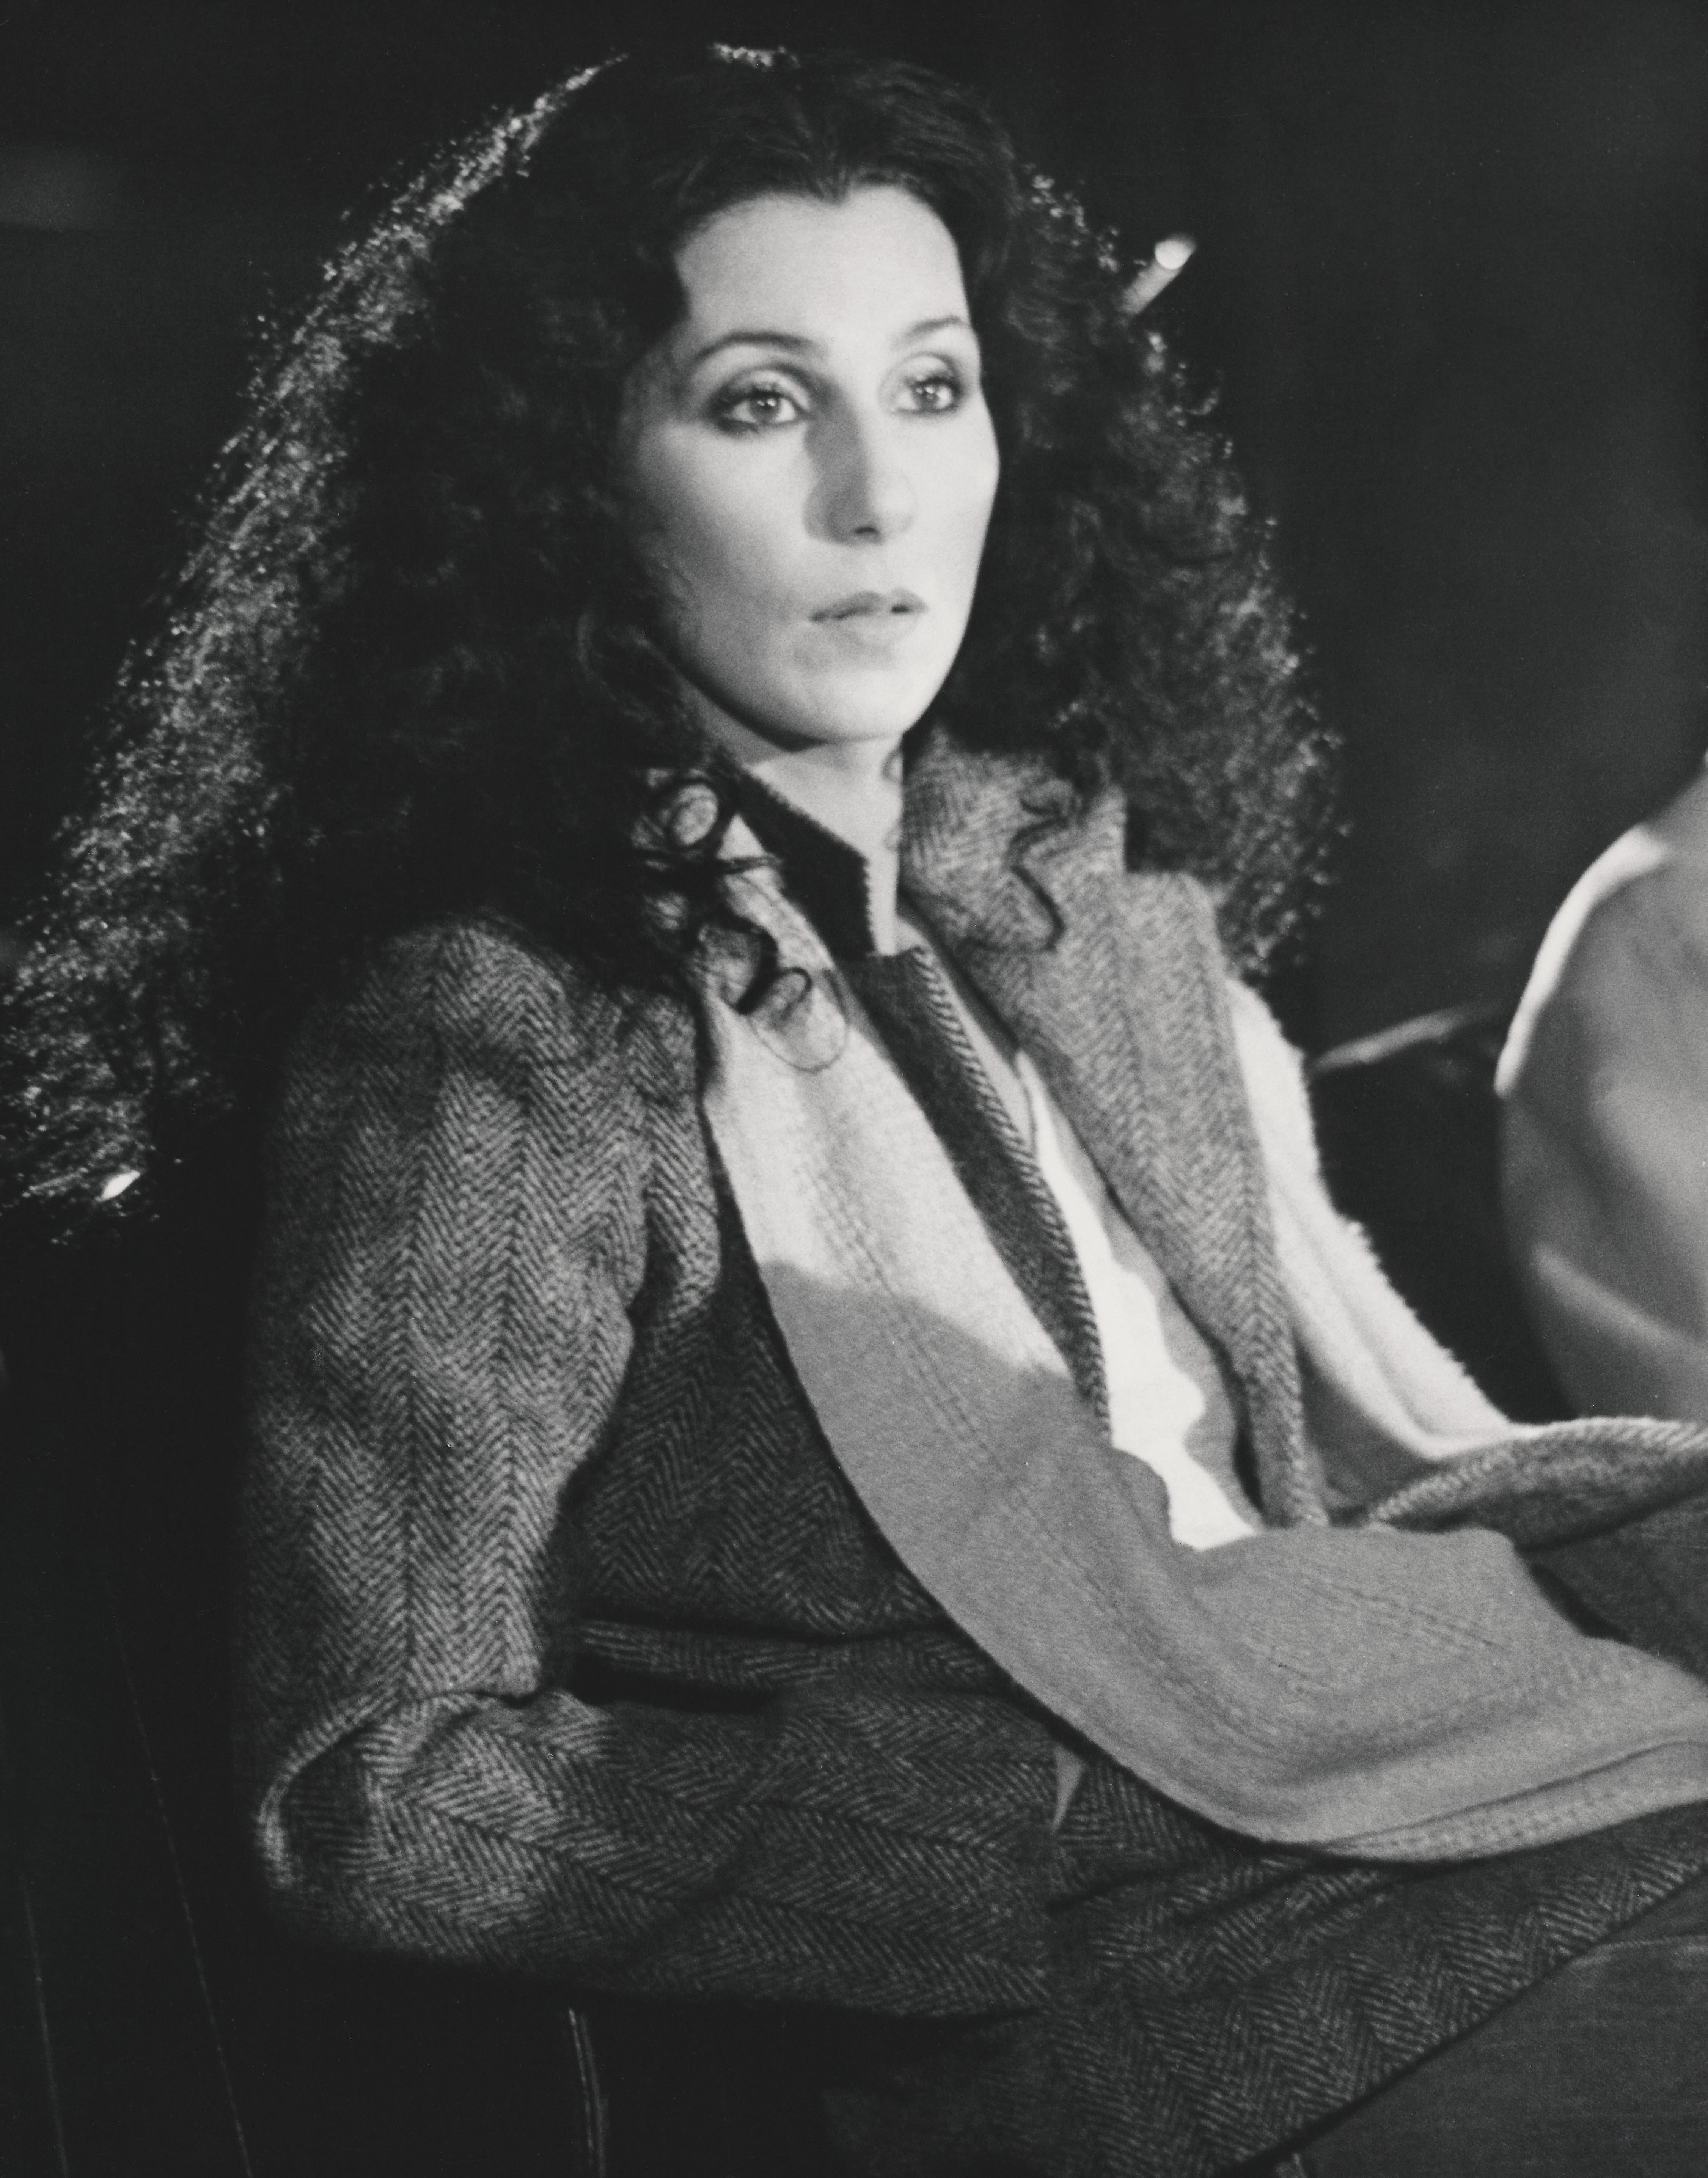 Unknown Black and White Photograph - Cher: Star of Film, Music, Television, and Fashion Globe Photos Fine Art Print